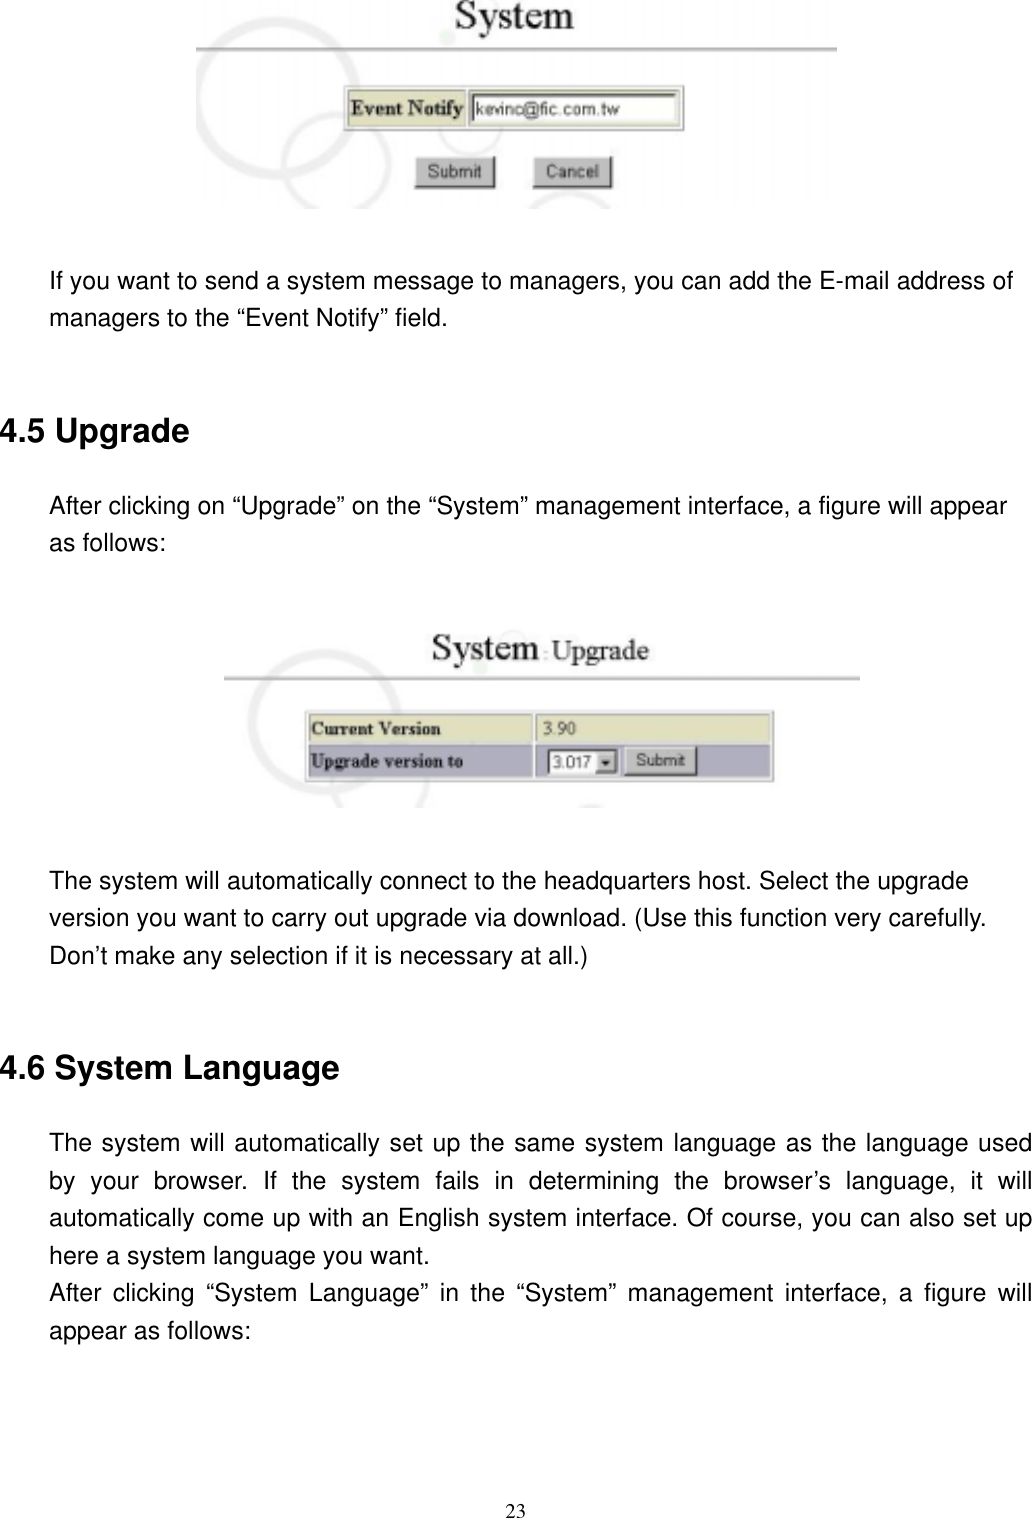  23  If you want to send a system message to managers, you can add the E-mail address of managers to the “Event Notify” field.  4.5 Upgrade After clicking on “Upgrade” on the “System” management interface, a figure will appear as follows:    The system will automatically connect to the headquarters host. Select the upgrade version you want to carry out upgrade via download. (Use this function very carefully. Don’t make any selection if it is necessary at all.)  4.6 System Language The system will automatically set up the same system language as the language used by your browser. If the system fails in determining the browser’s language, it will automatically come up with an English system interface. Of course, you can also set up here a system language you want. After clicking “System Language” in the “System” management interface, a figure will appear as follows:  